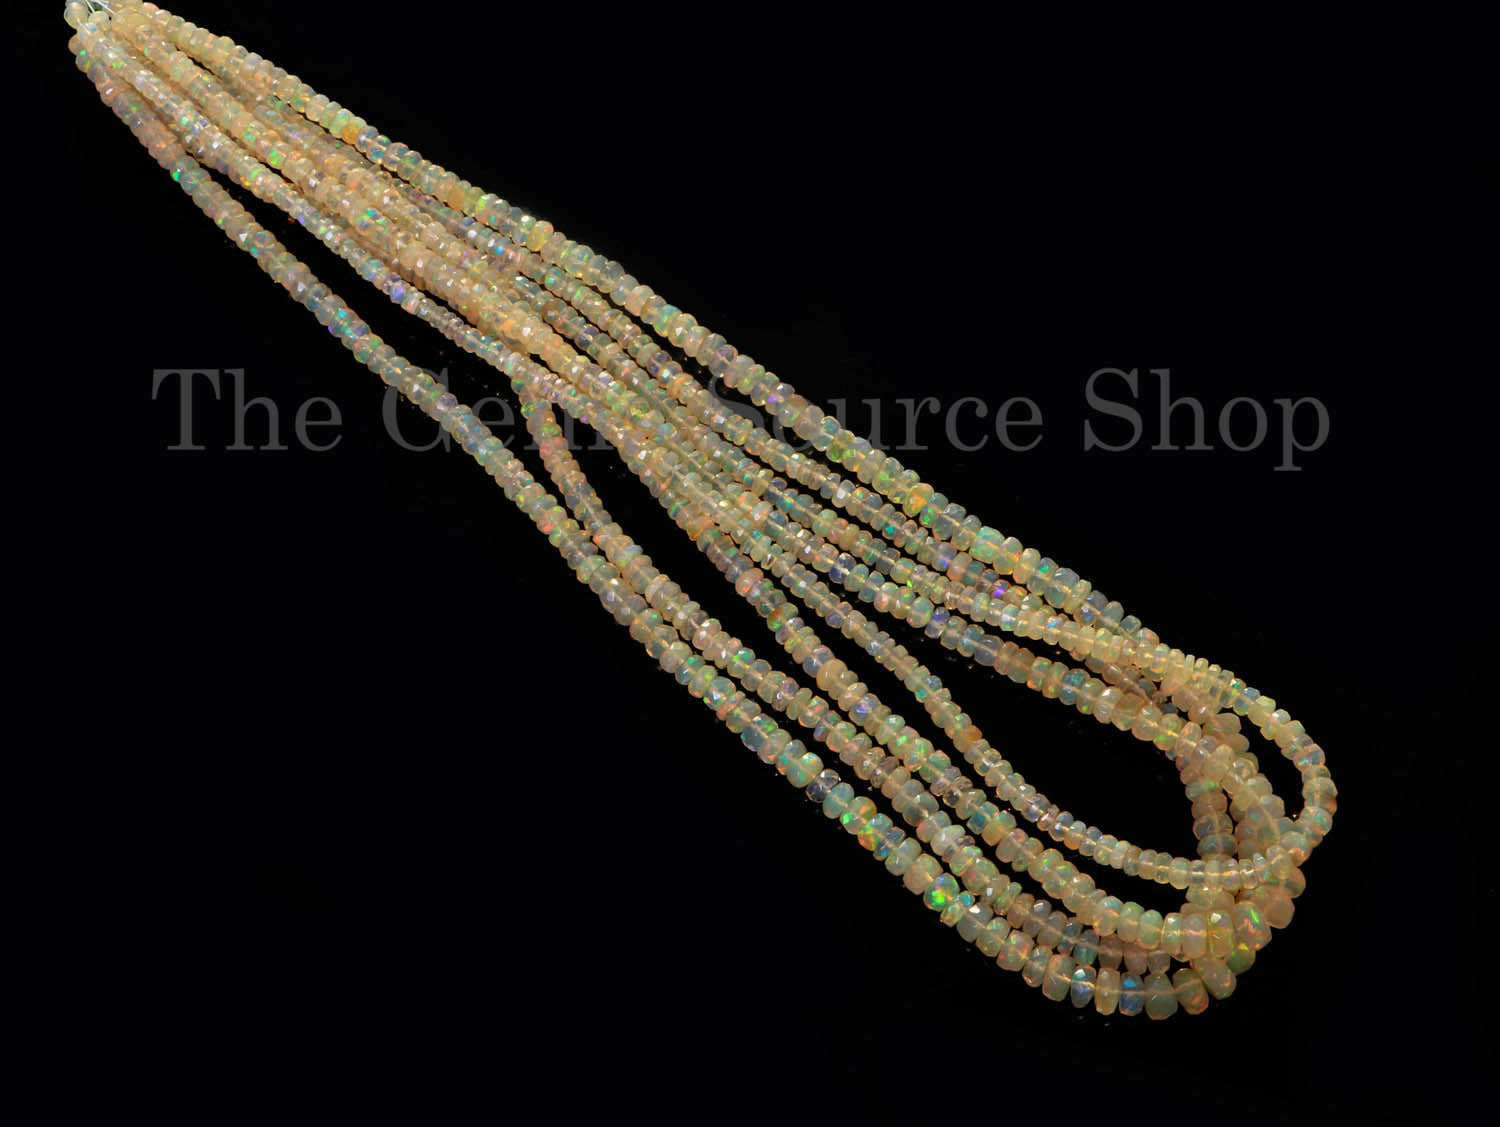 Ethiopian Opal Faceted Rondelle Beads, Opal Gemstone Beads